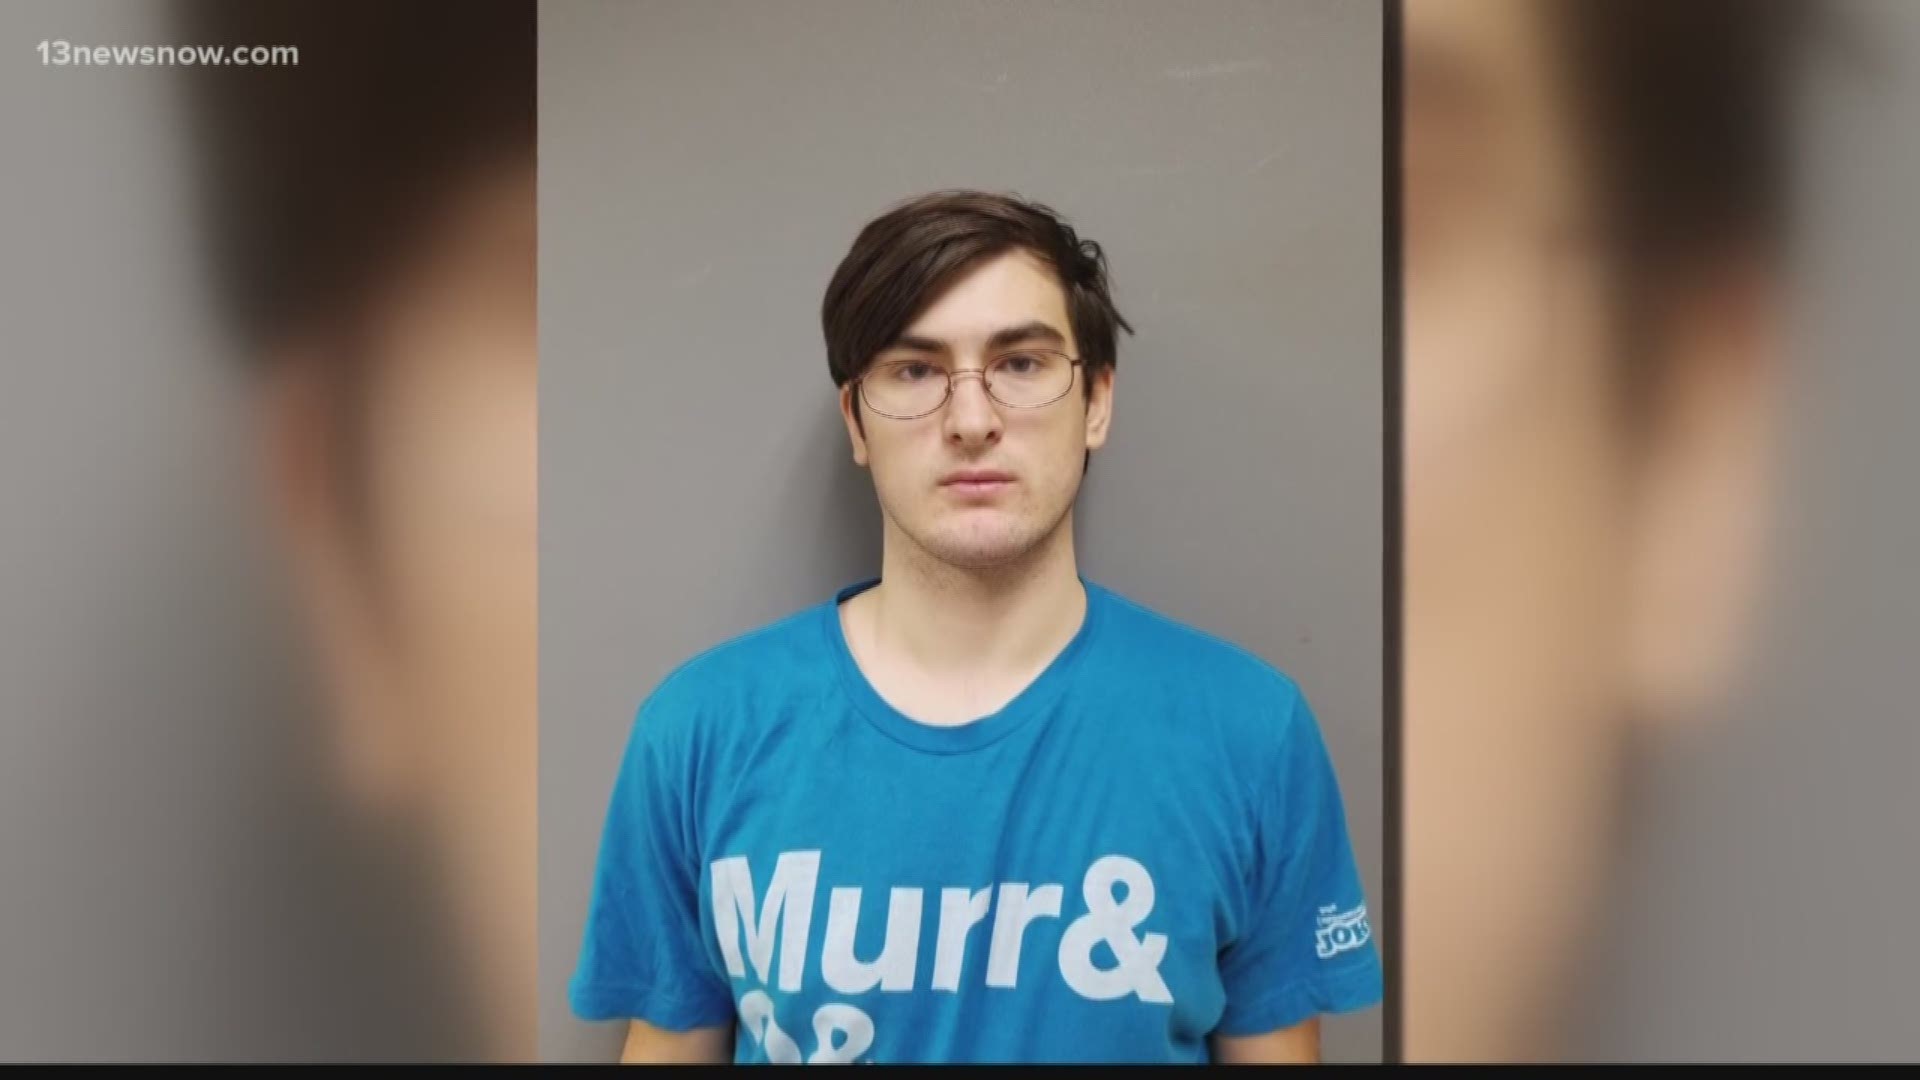 An 18-year-old was arrested in Carrollton after over 5,000 photos of child porn was found of several electronic devices.